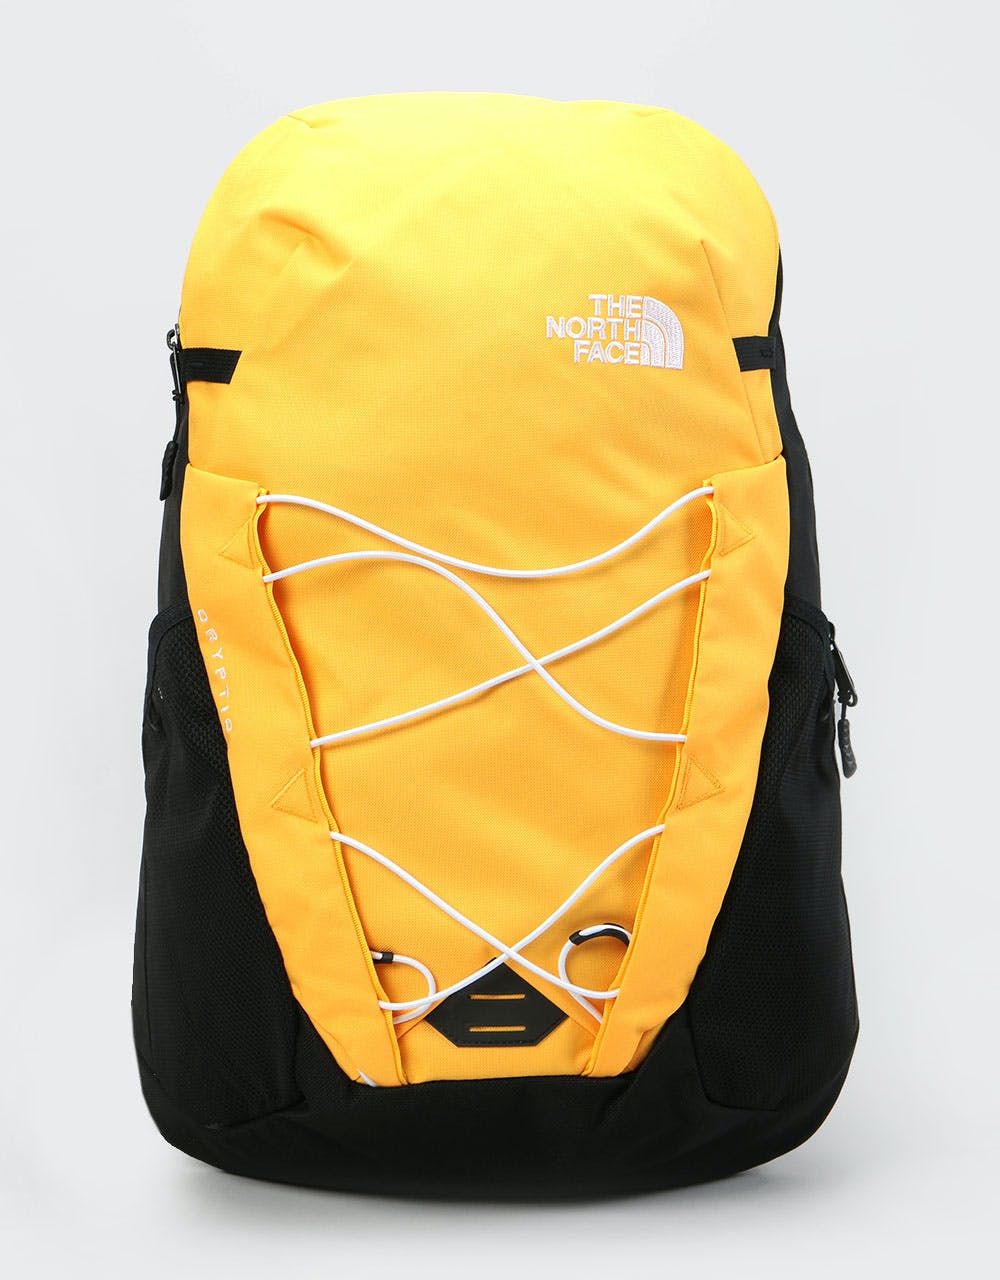 The North Face Cryptic Backpack - TNF Yellow/TNF Black – Route One